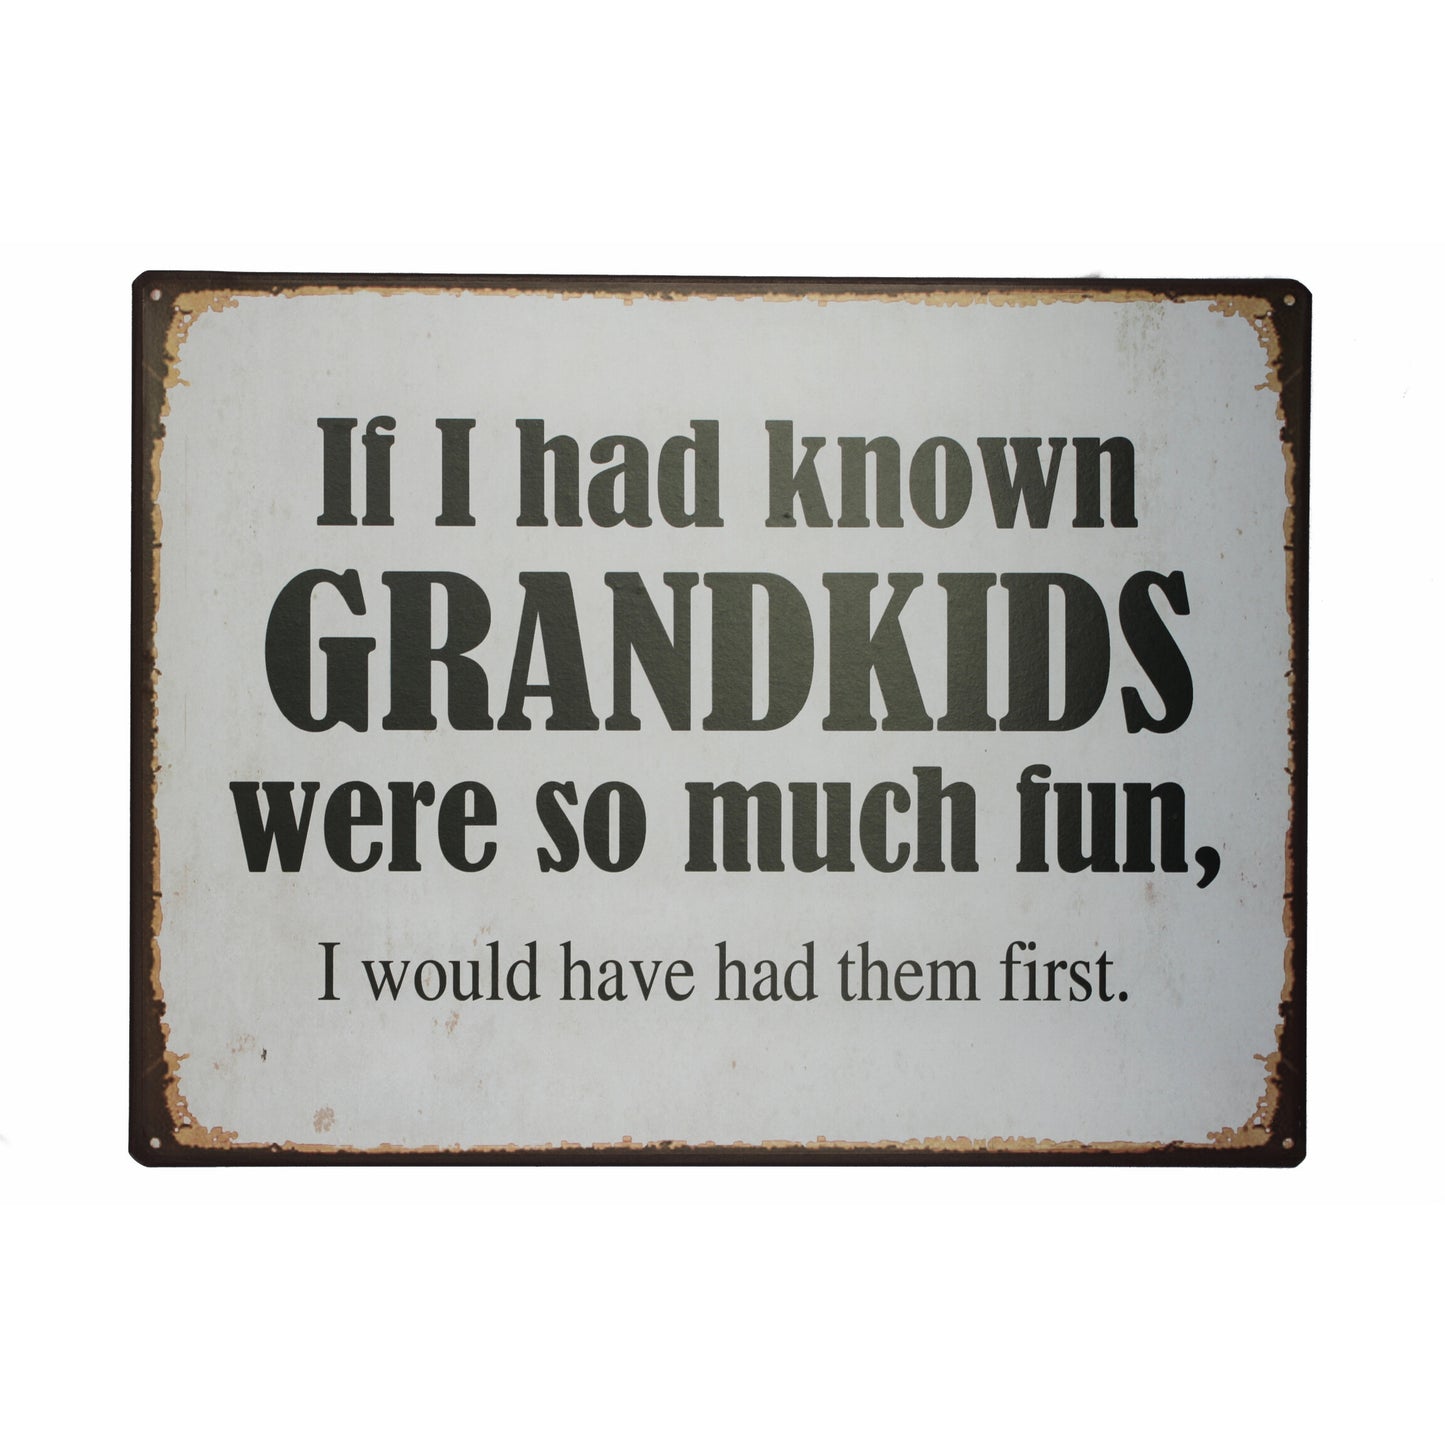 Blechschild: If I had known grandkids were so much fun, I would have had them first